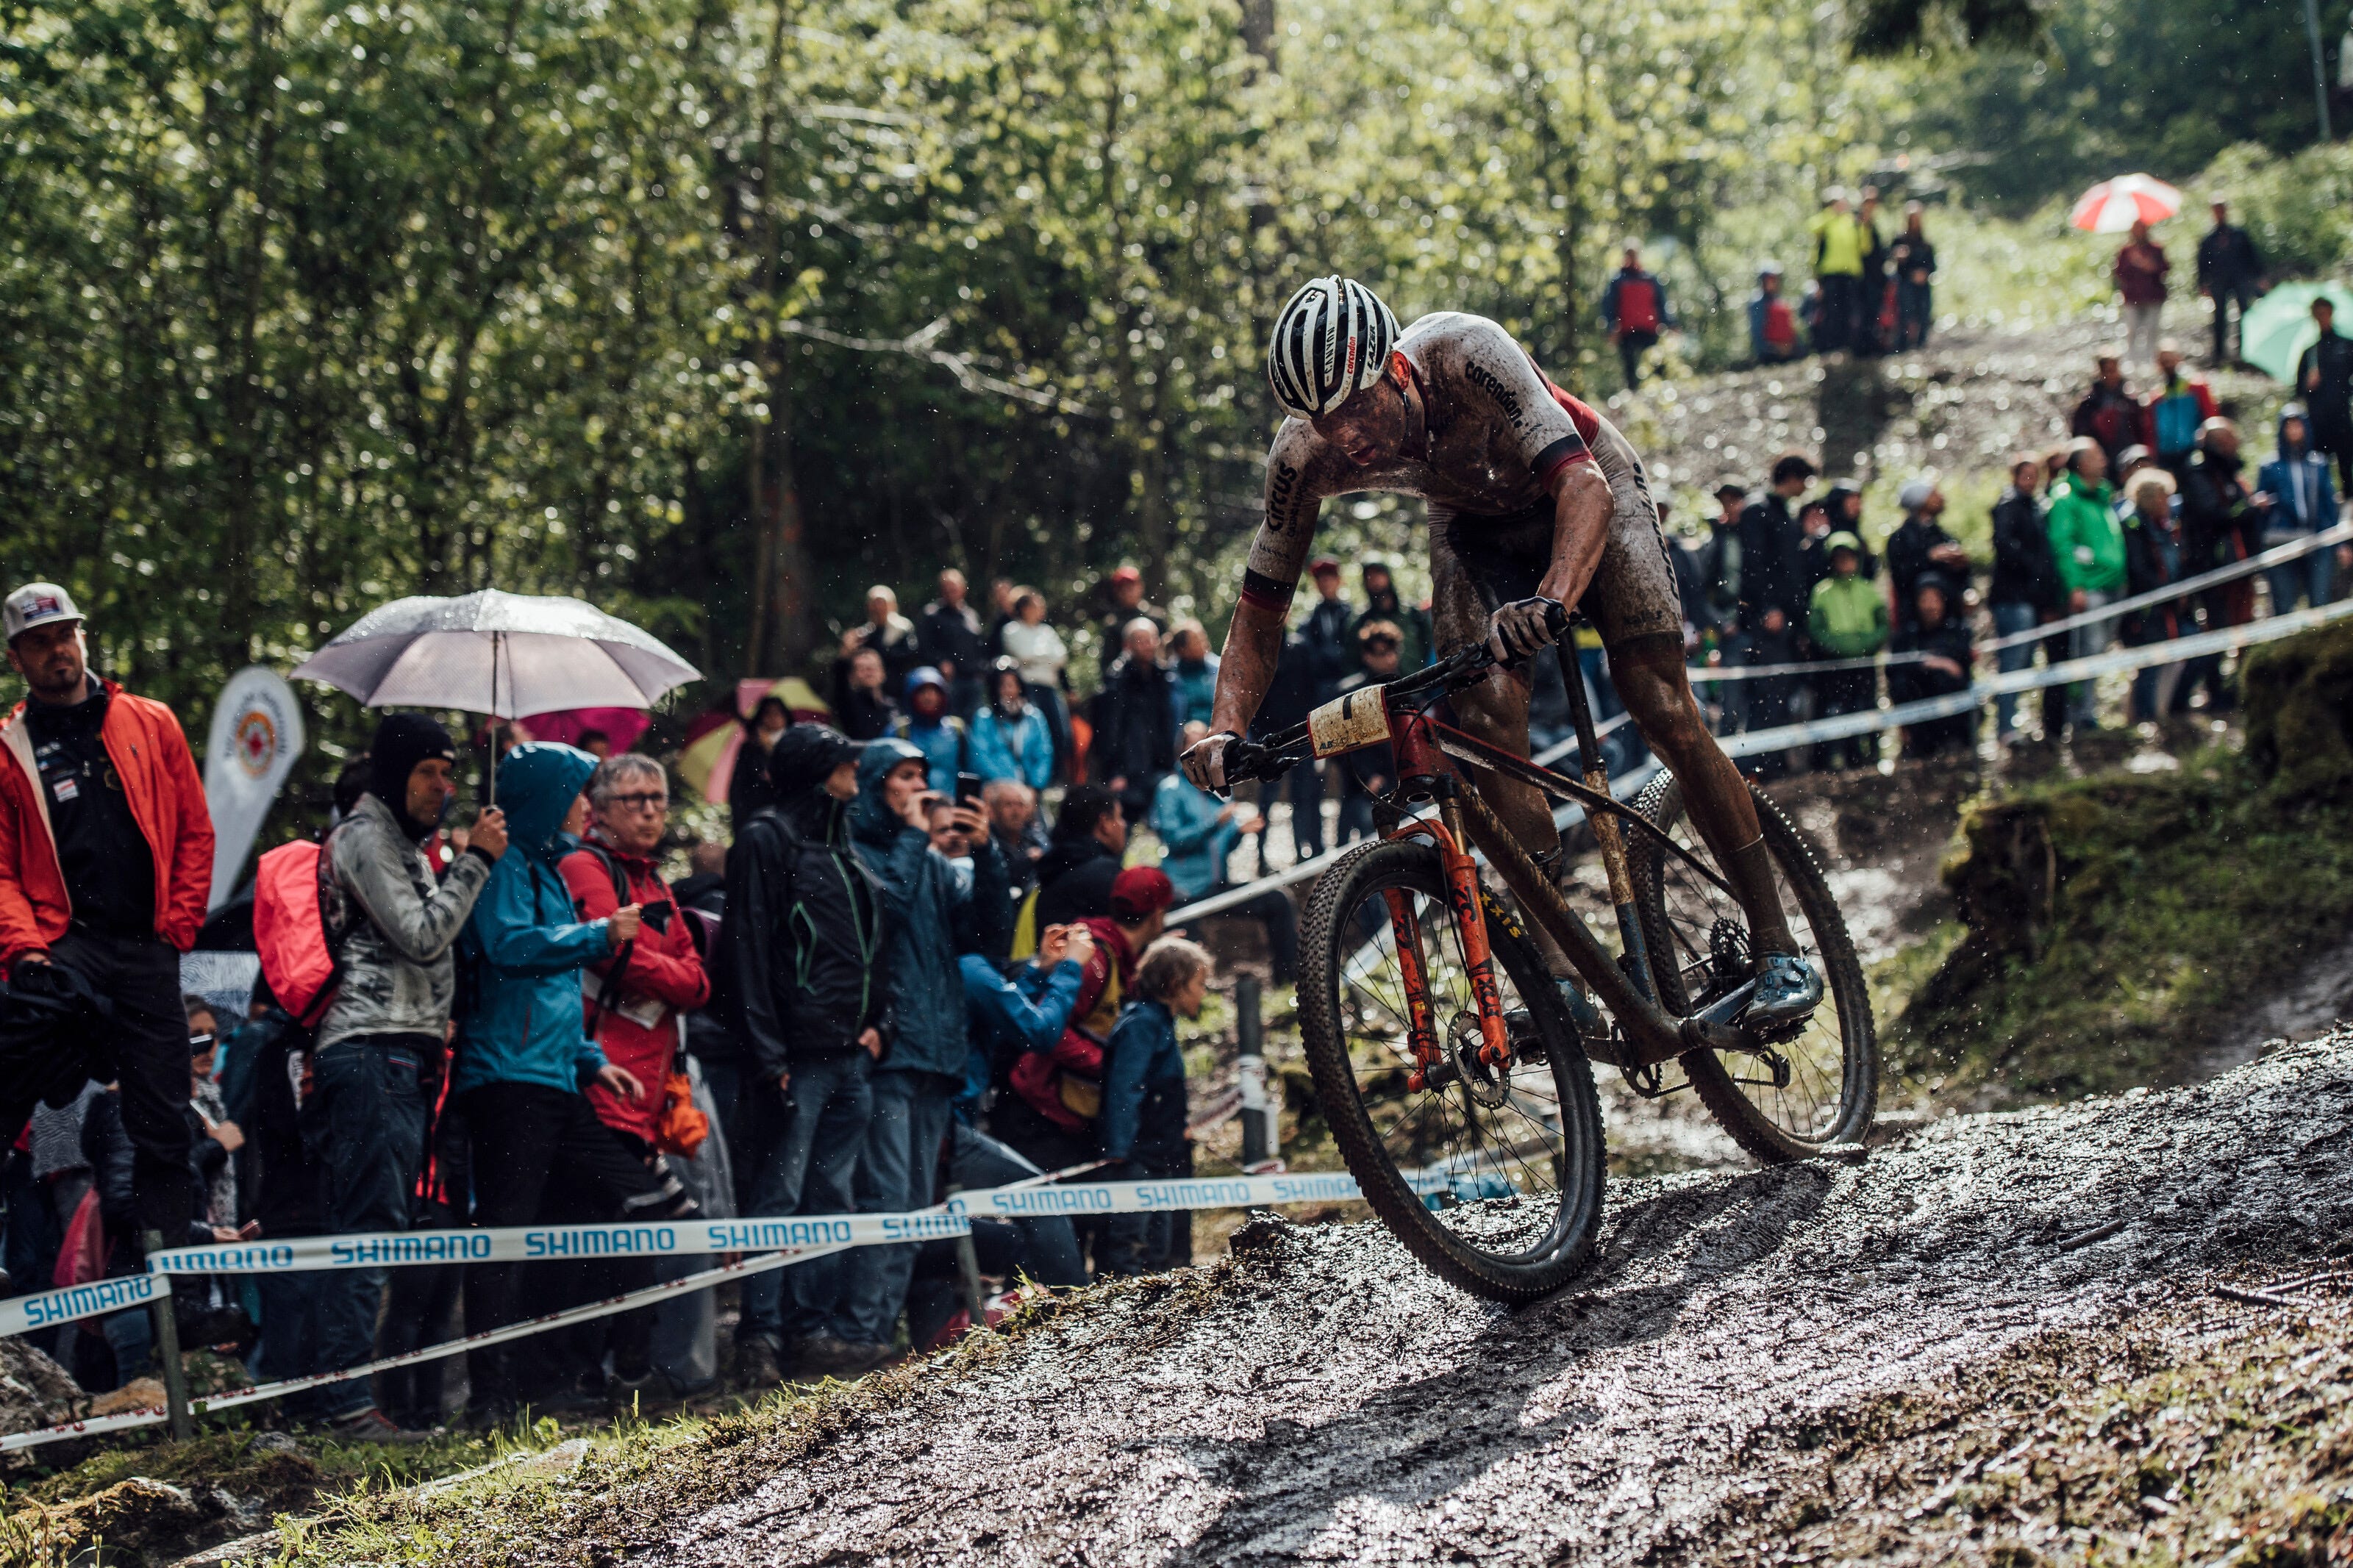 Ampere celebration allowance You Should Probably Watch the XCO Mountain Bike World Cups This Summer